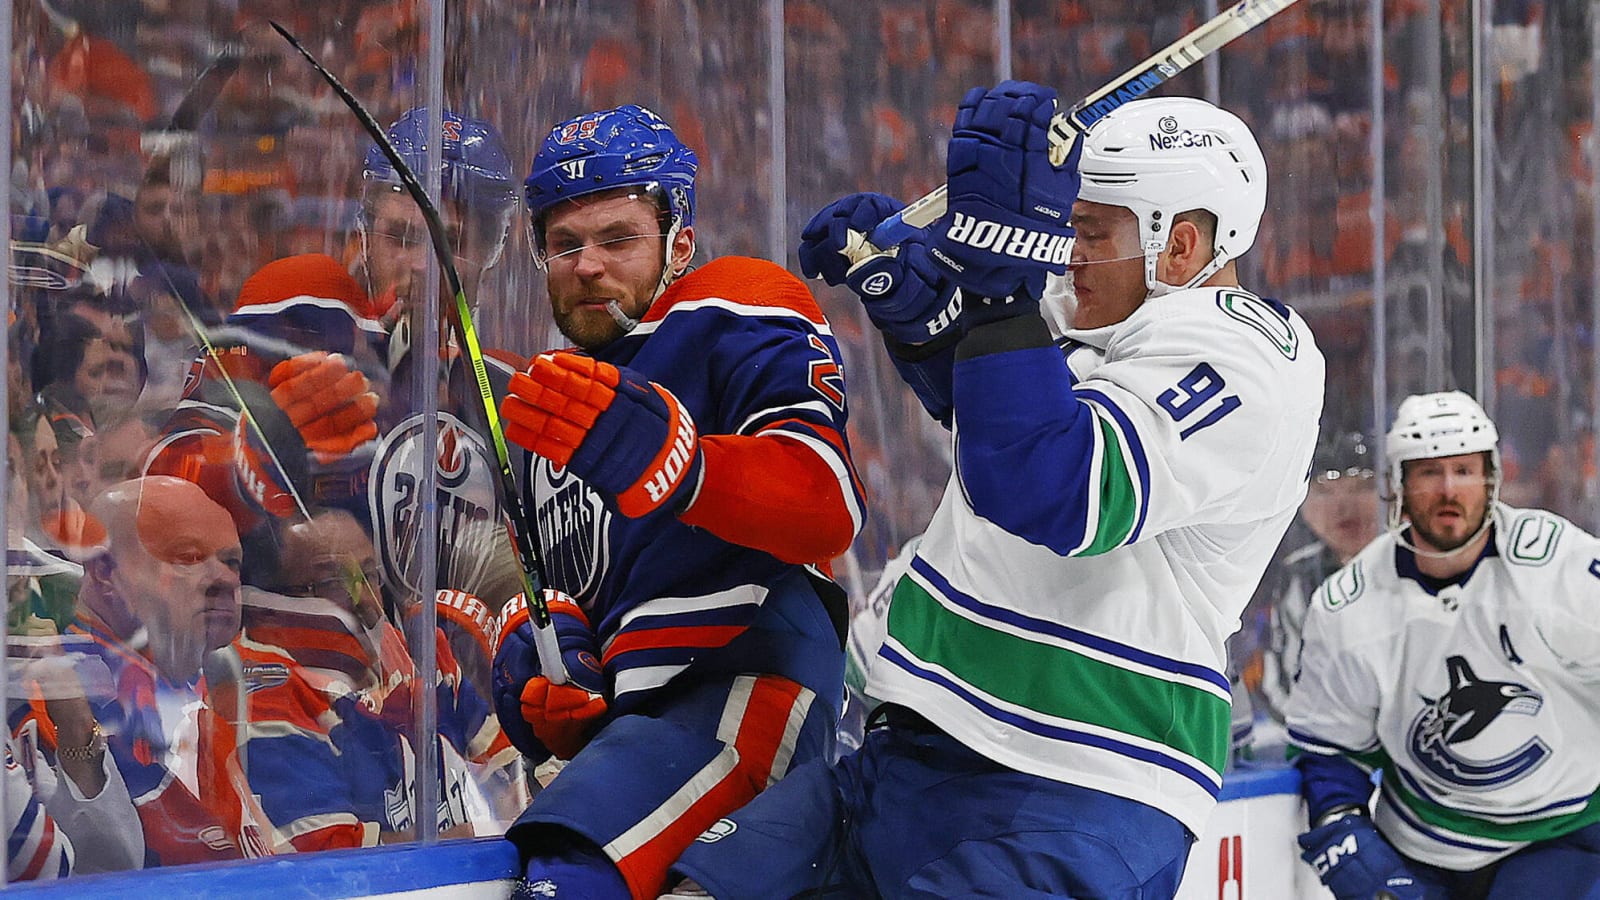 Canucks’ Road Warrior Mentality on Display vs. Oilers in Game 3